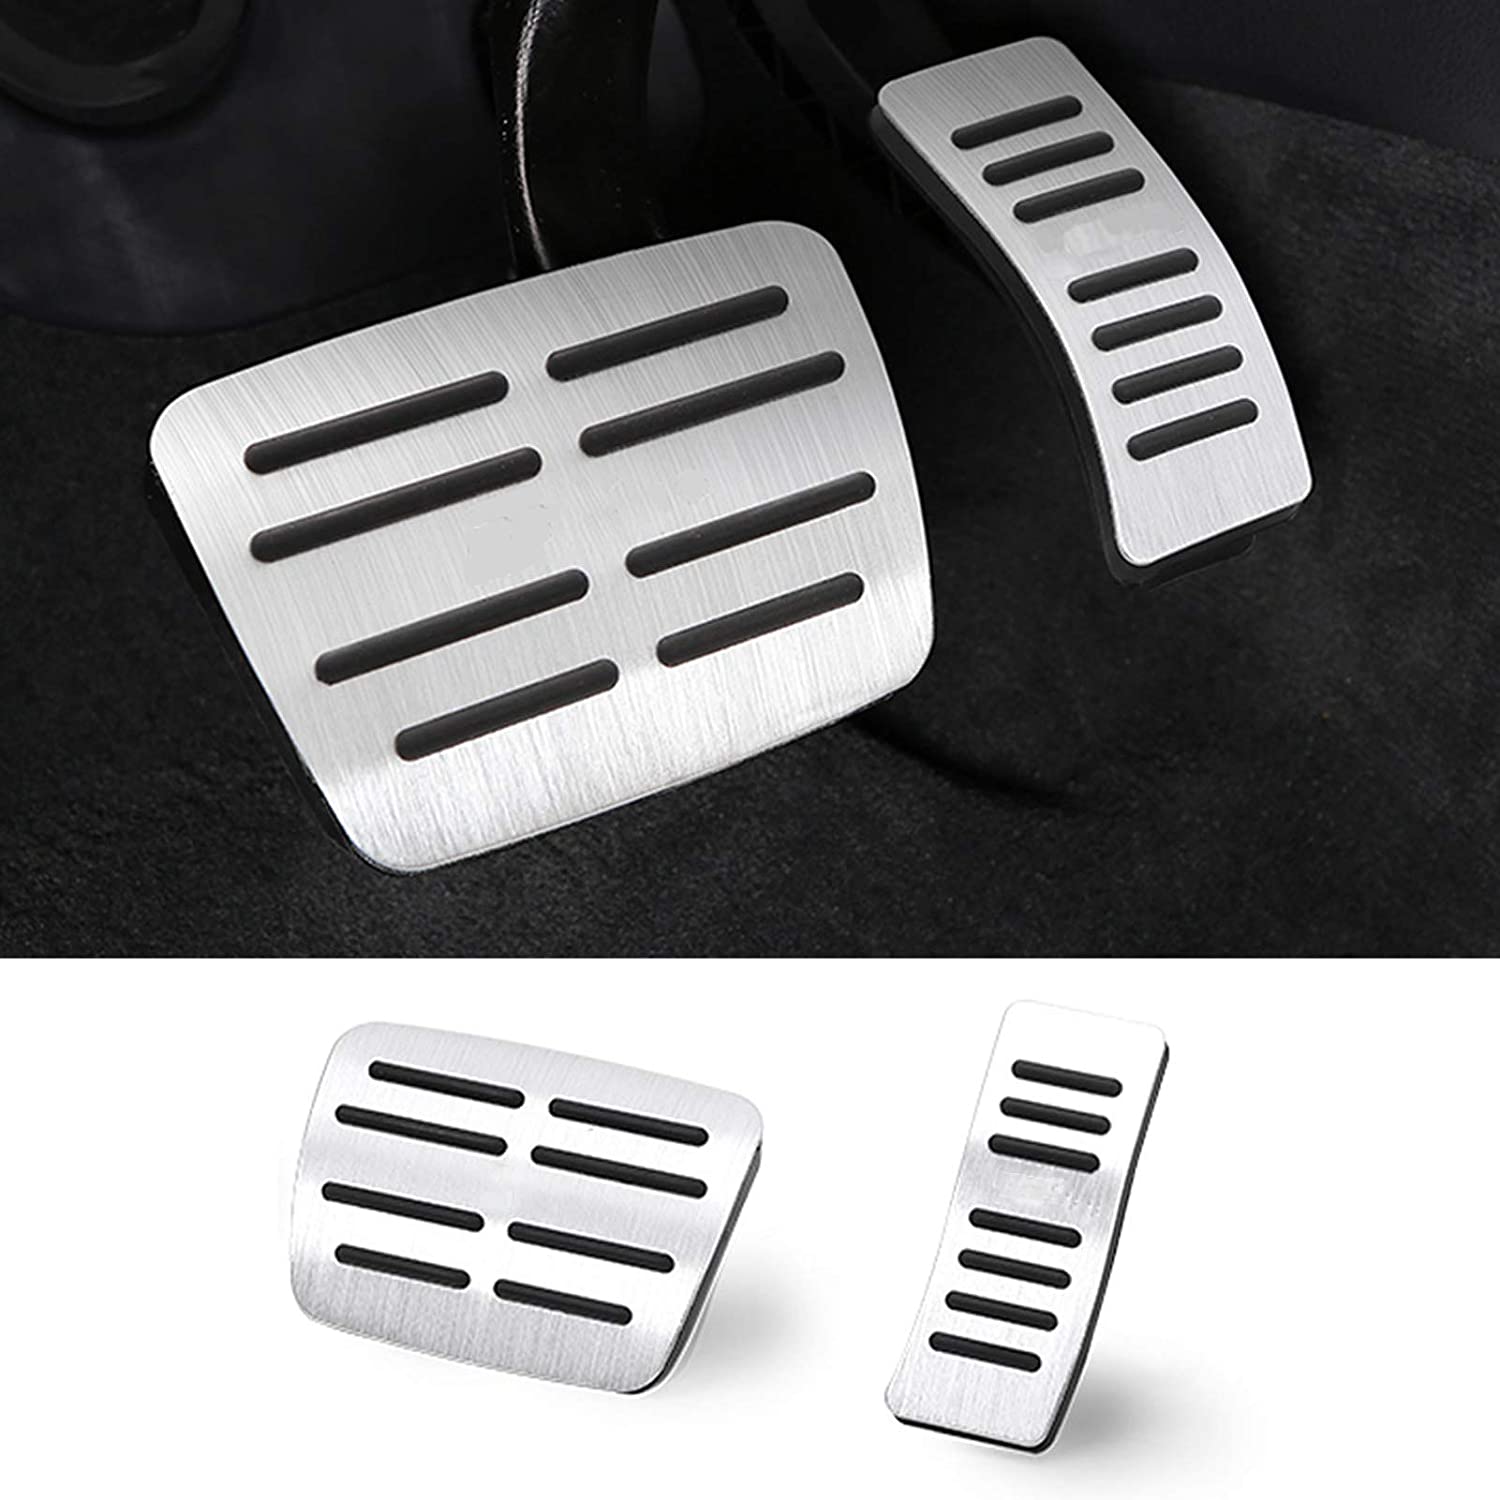 NYZAUTO Anti-Slip Foot Pedal Pads kit Compatible with A4 A5 A6 A7 A8 Q5 and Porsche Macan,at No Drilling Aluminum Brake and Gas Accelerator Pedal Covers